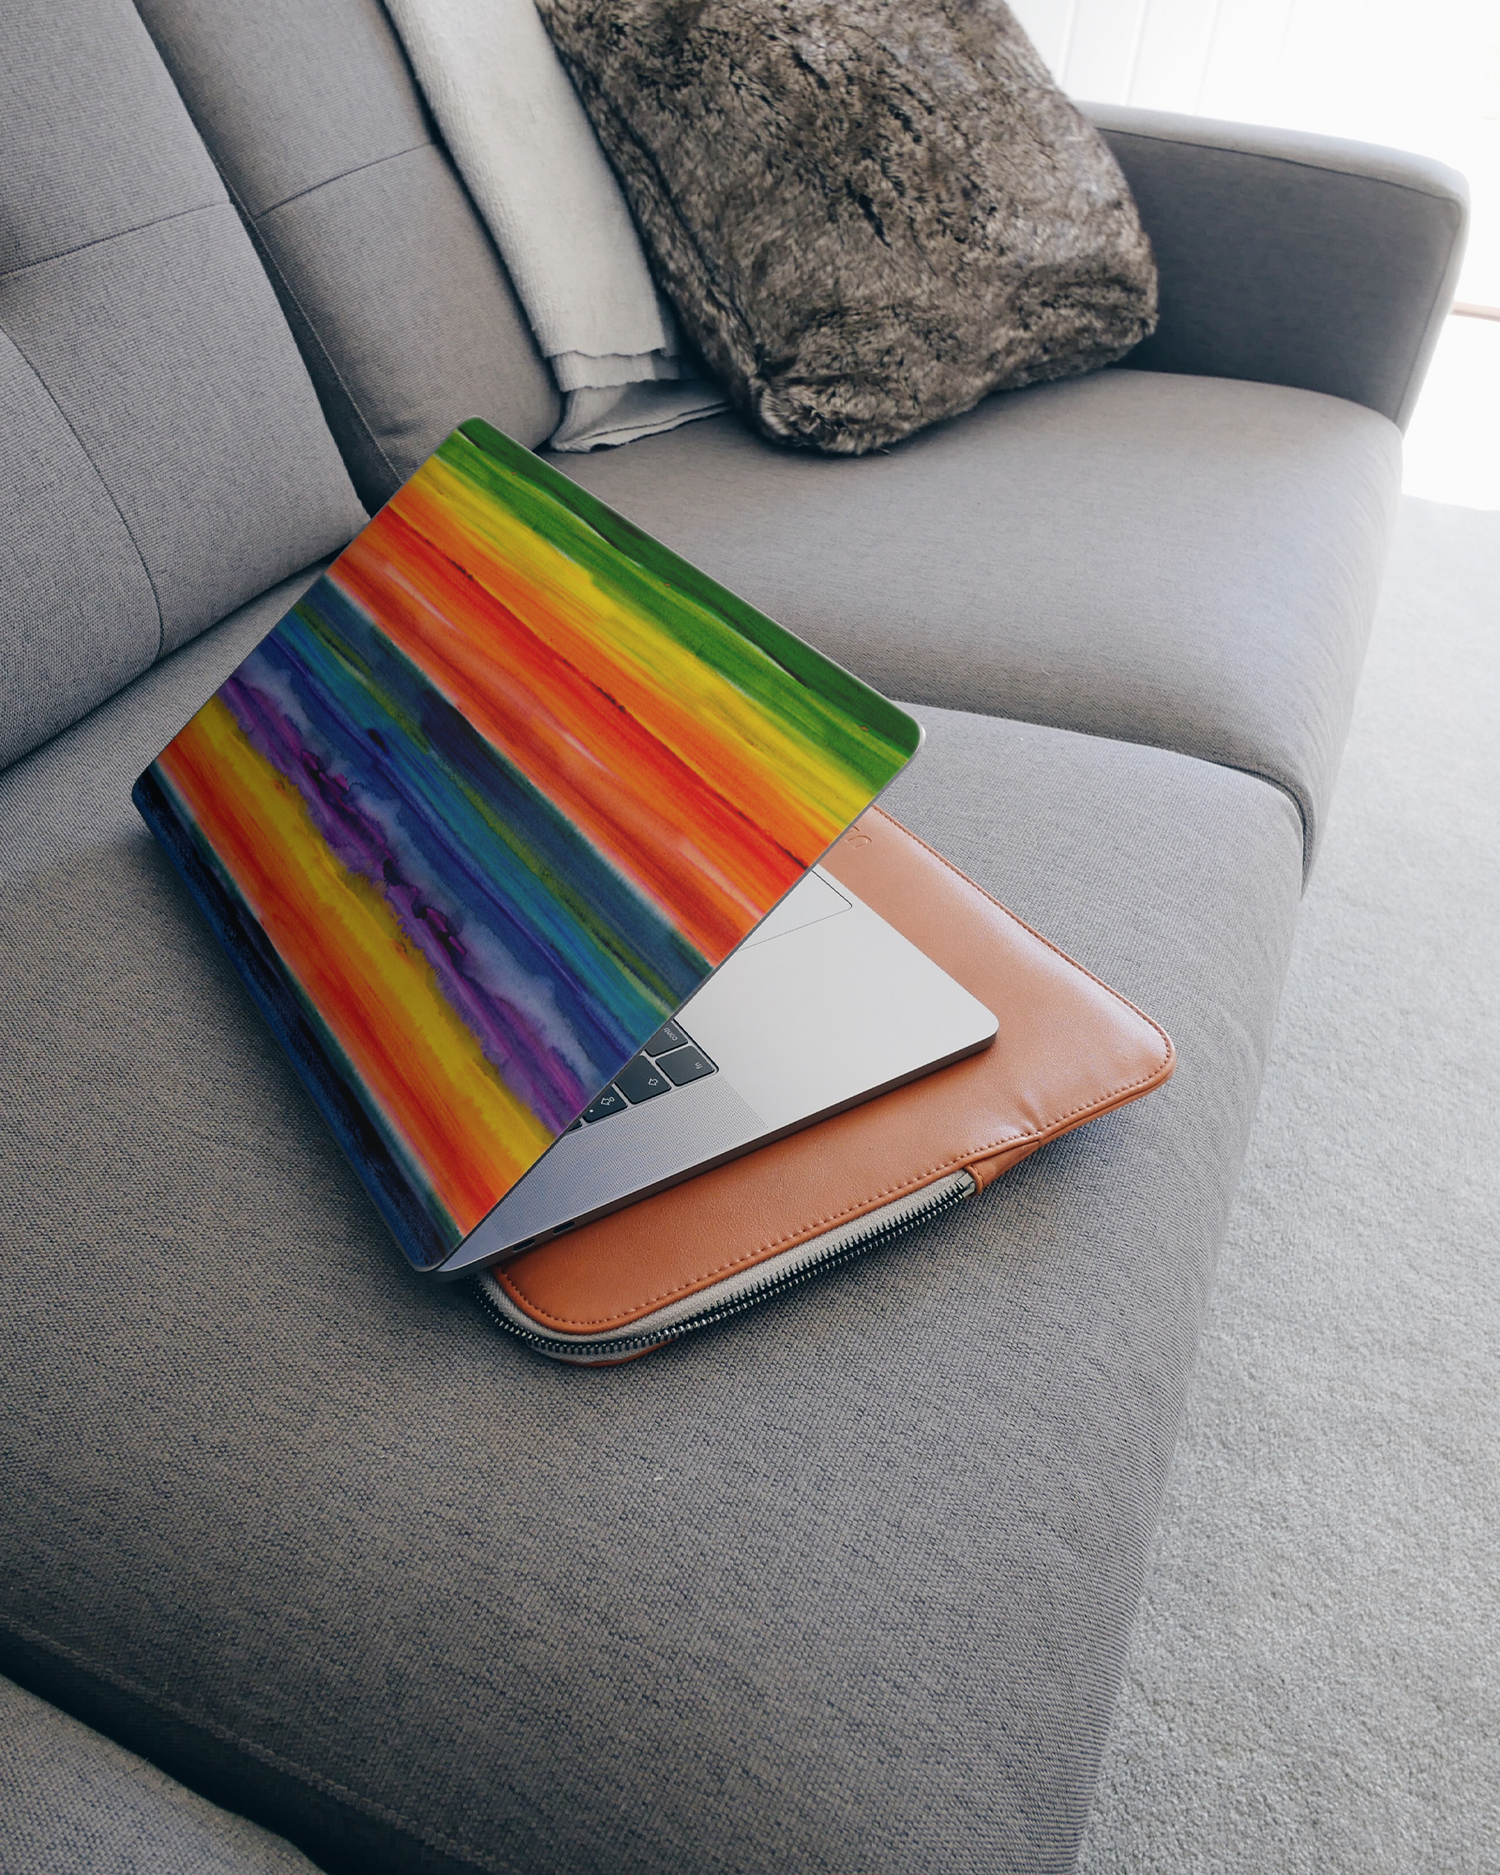 Striped Tie Dye Laptop Skin for 15 inch Apple MacBooks on a couch